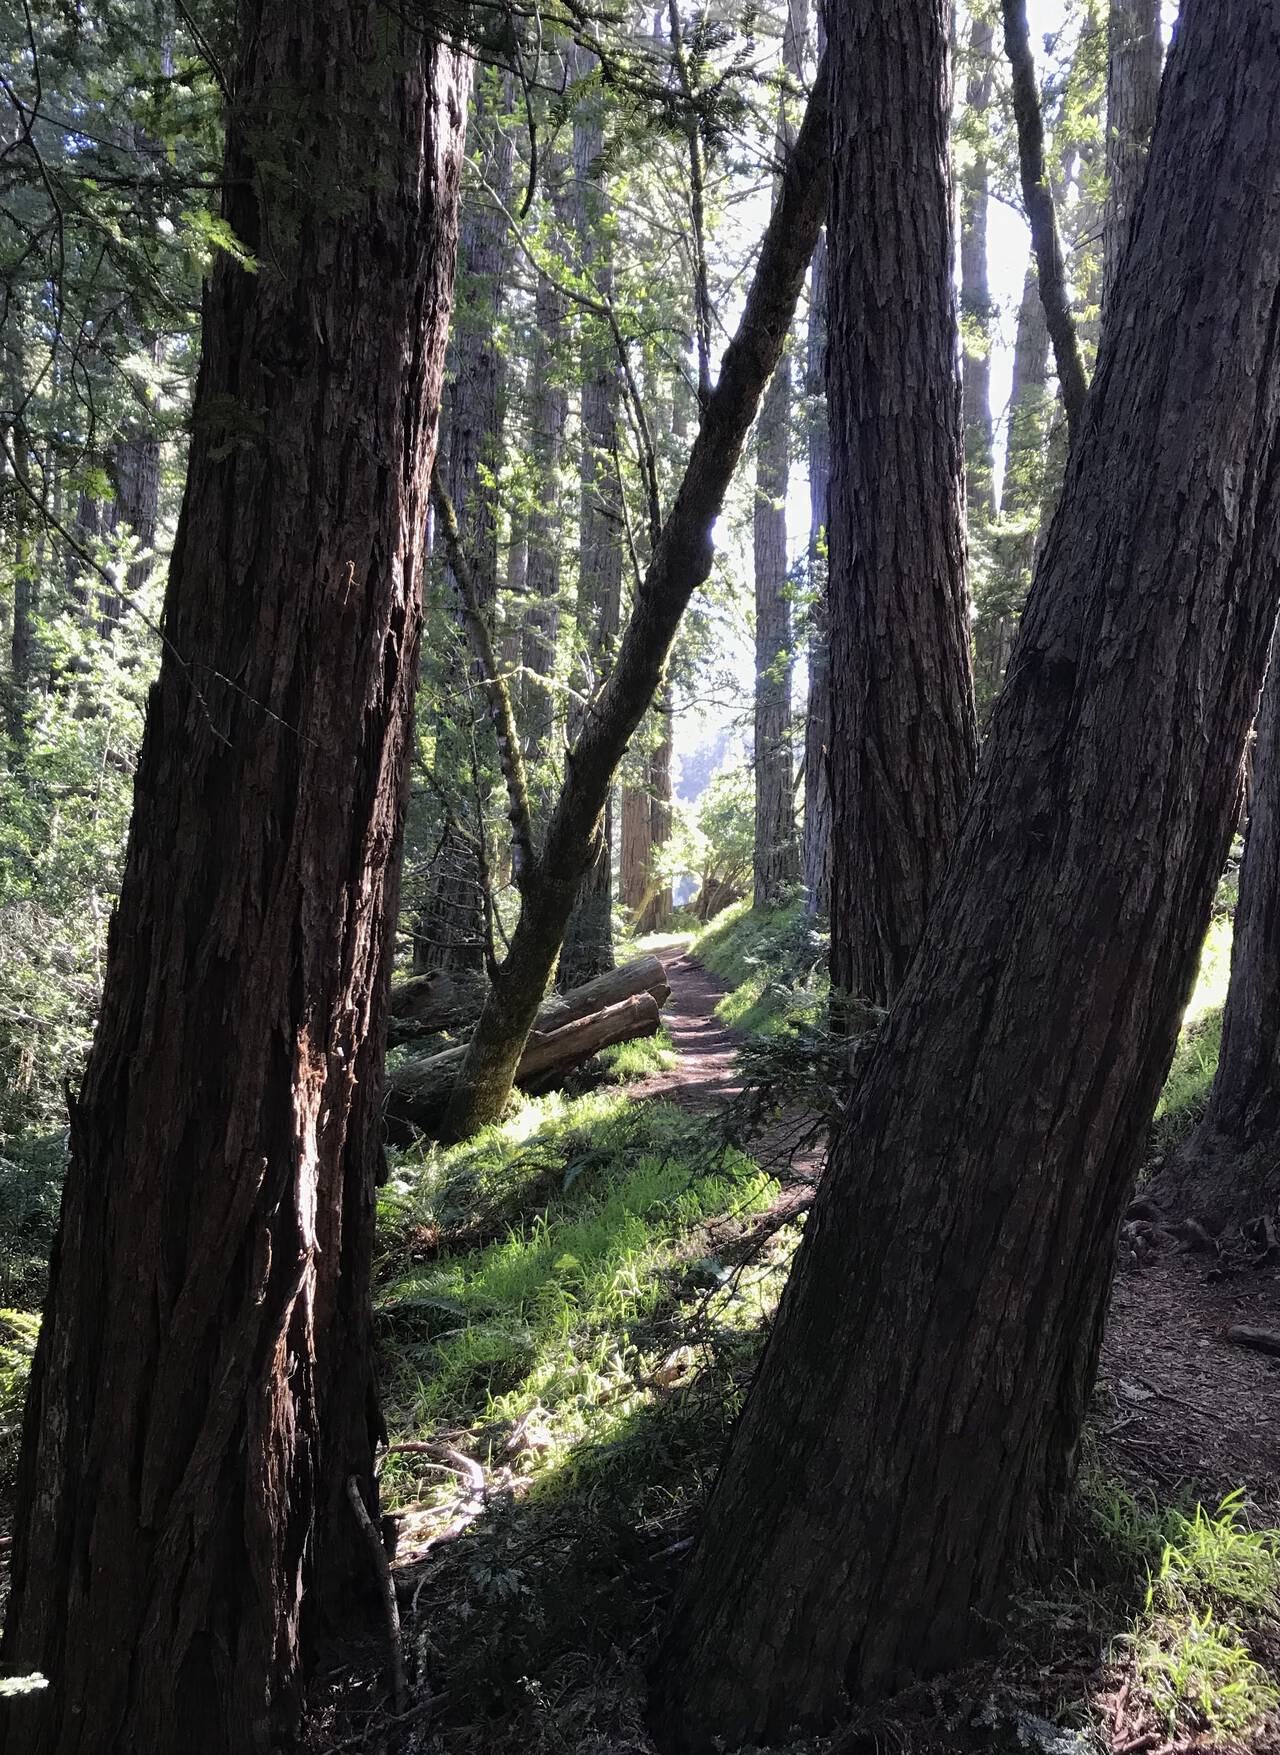 Angled redwoods in the foreground frame a sunlit trail which extends into the forest